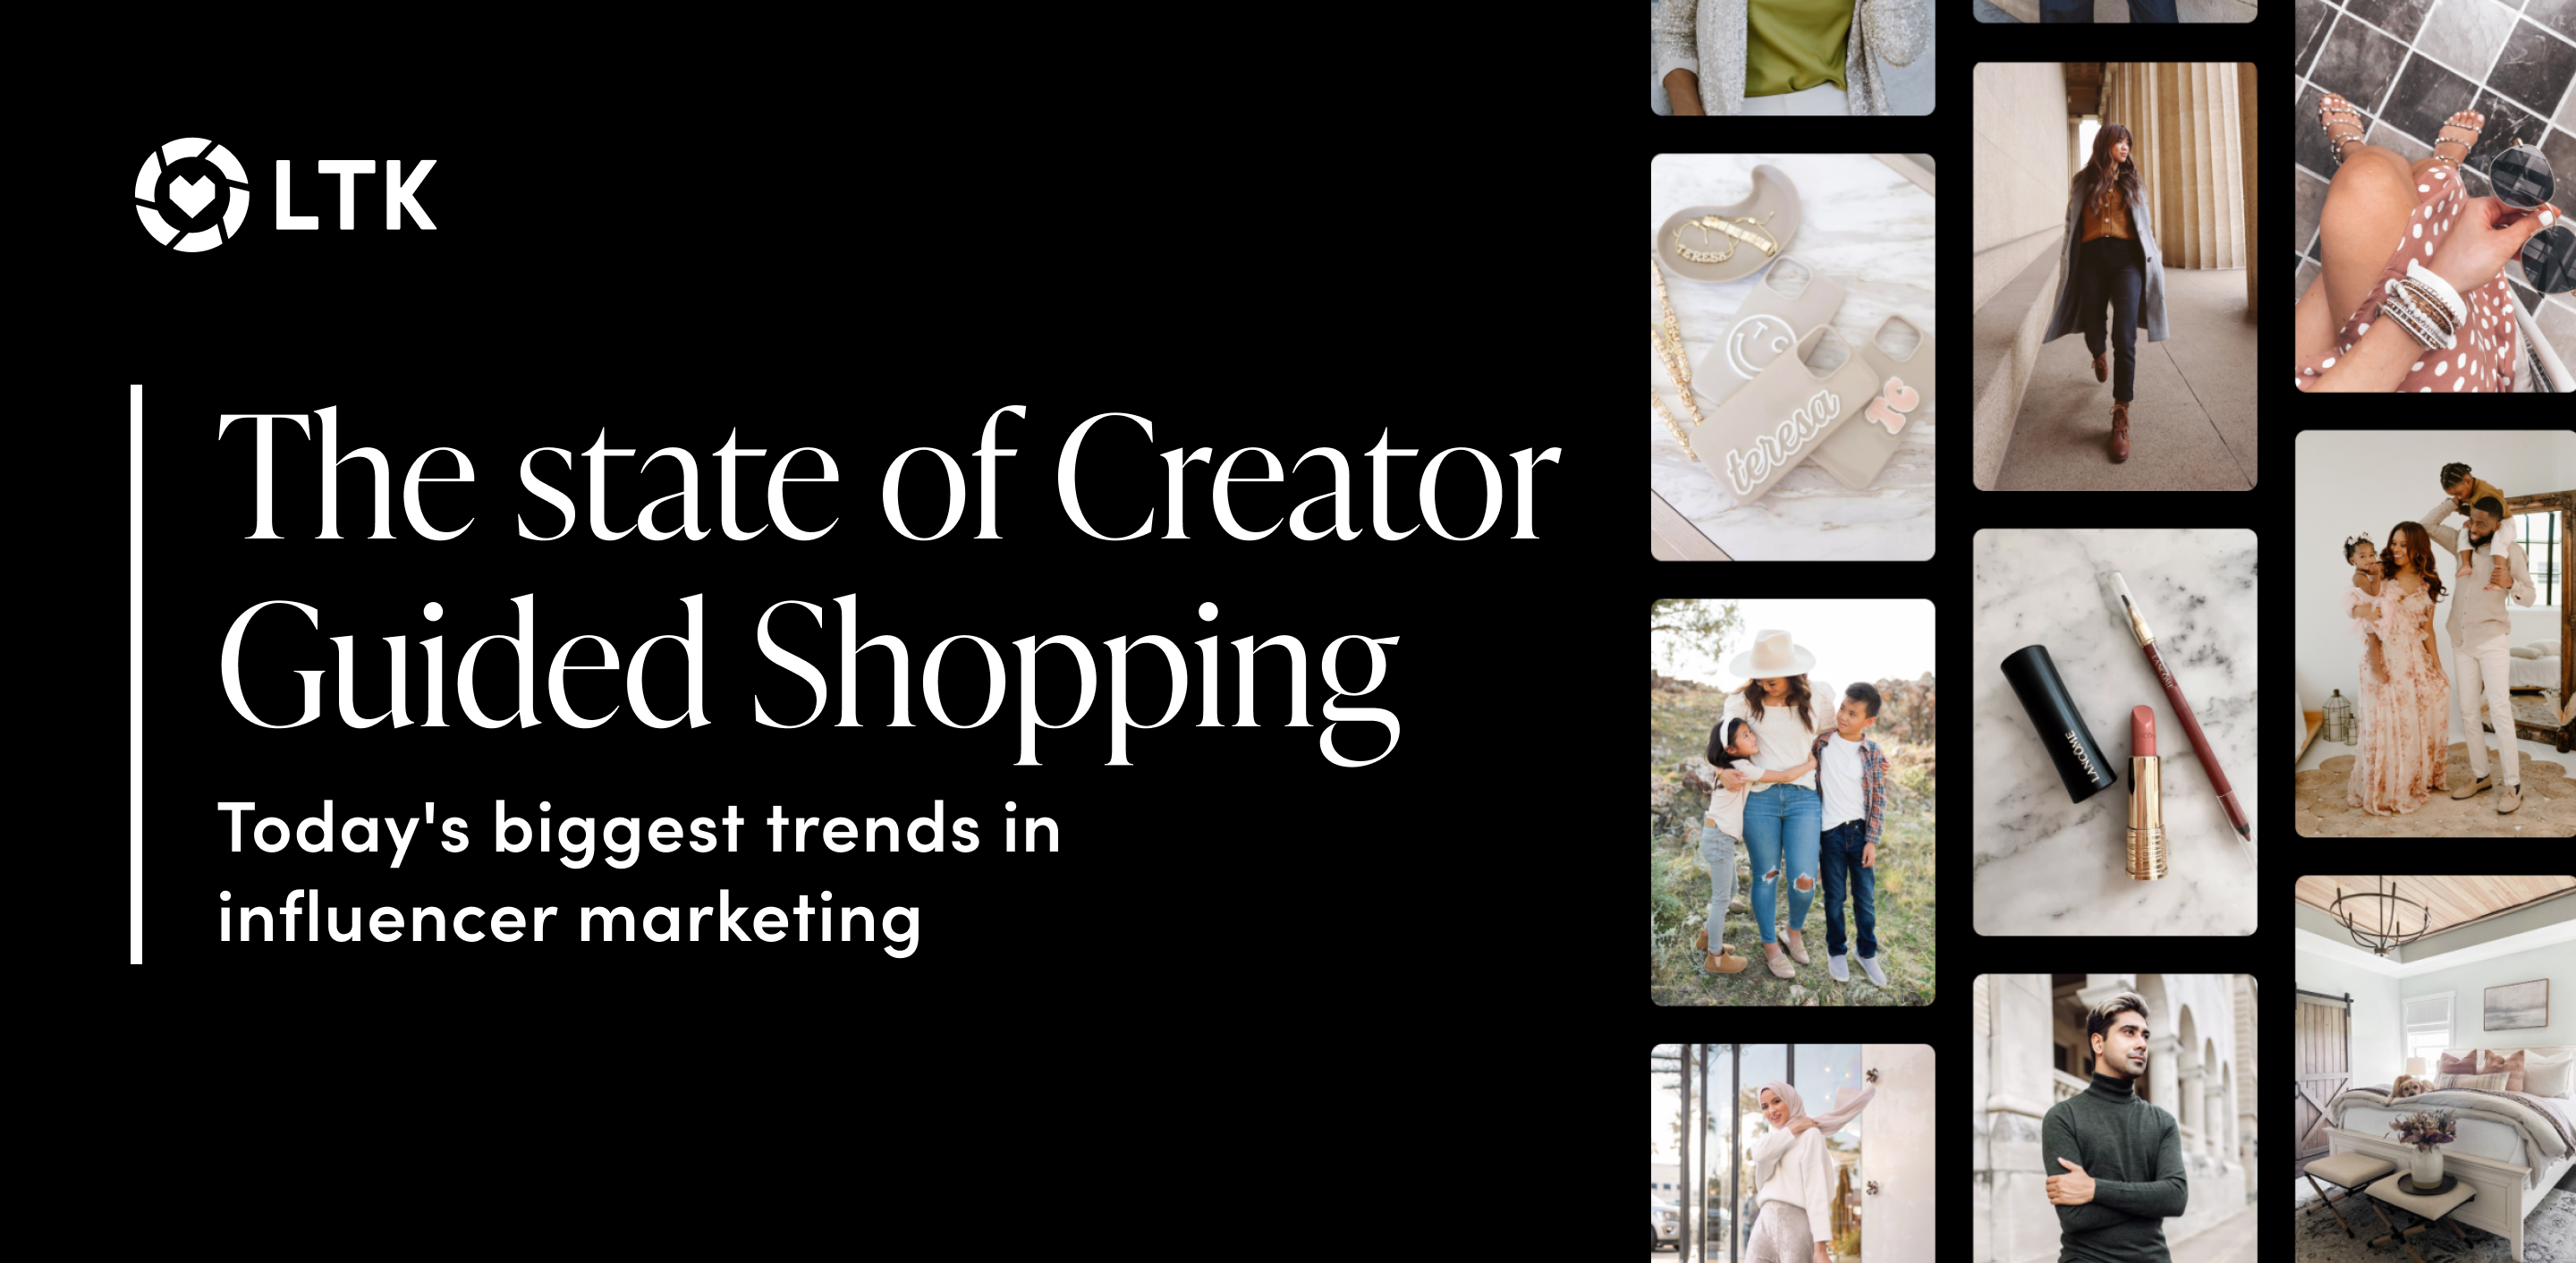 The state of Creator Guided Shopping